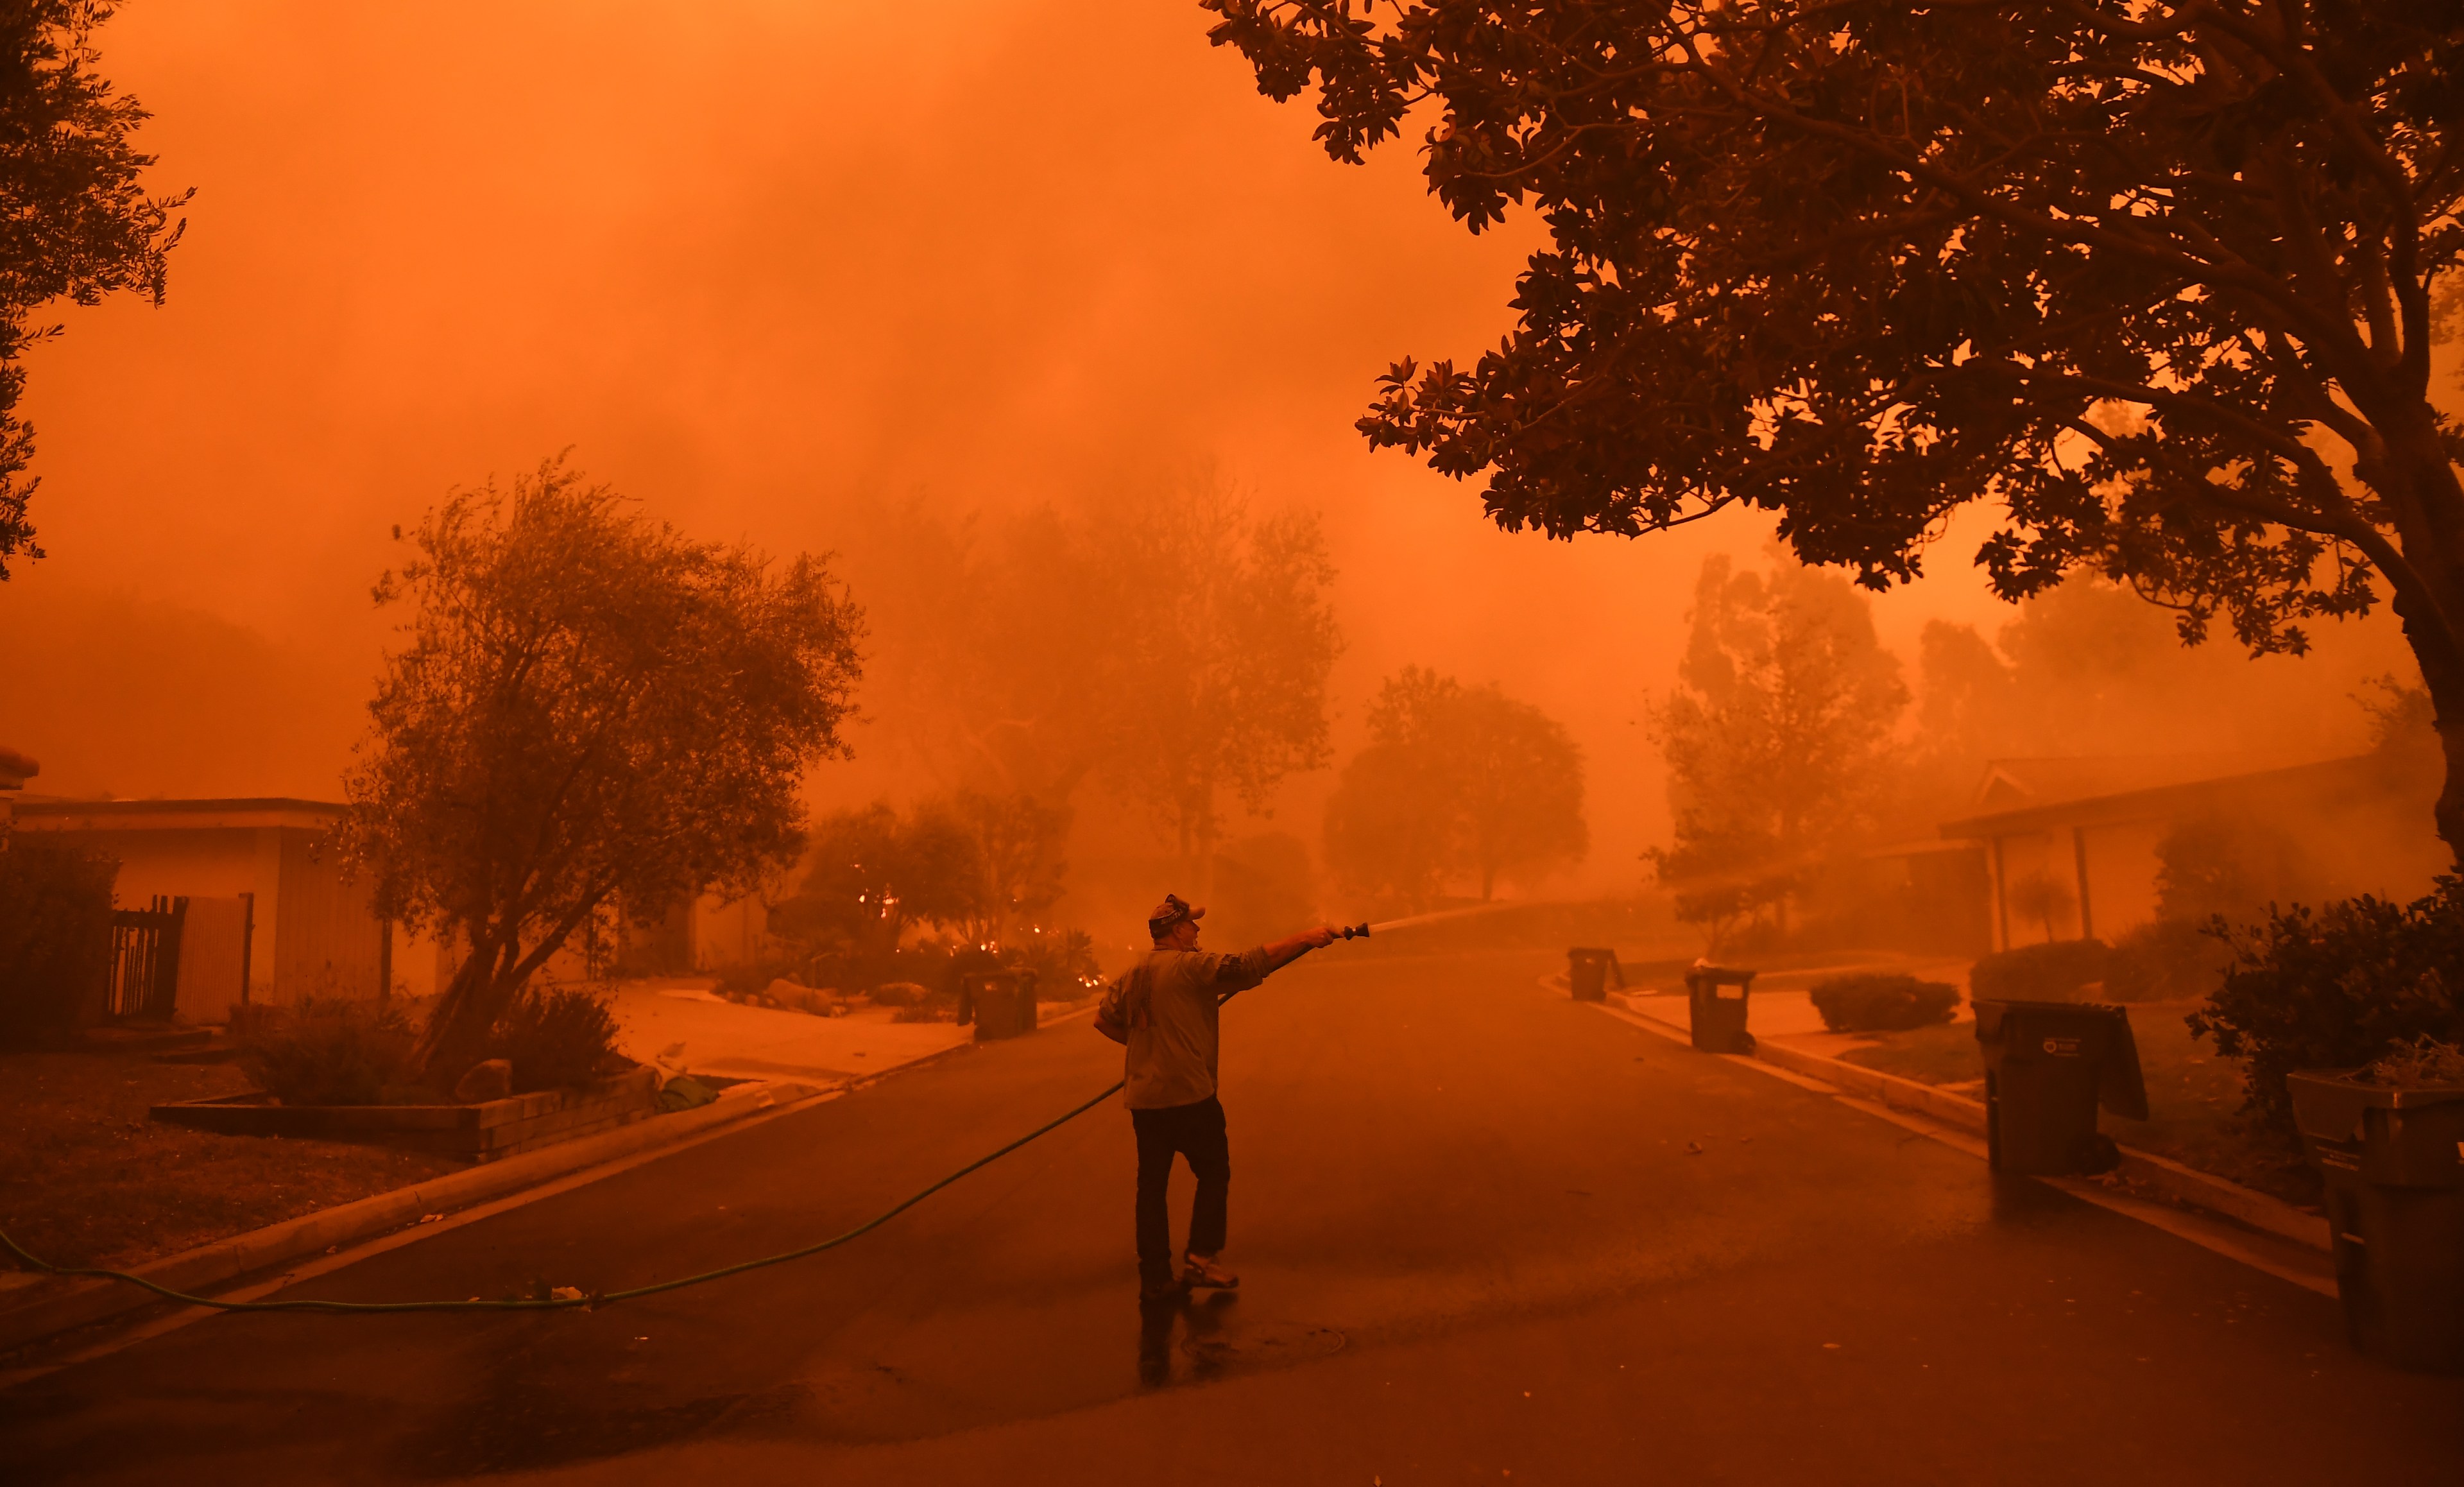 A person hoses down a street under a sky glowing orange due to wildfire smoke.